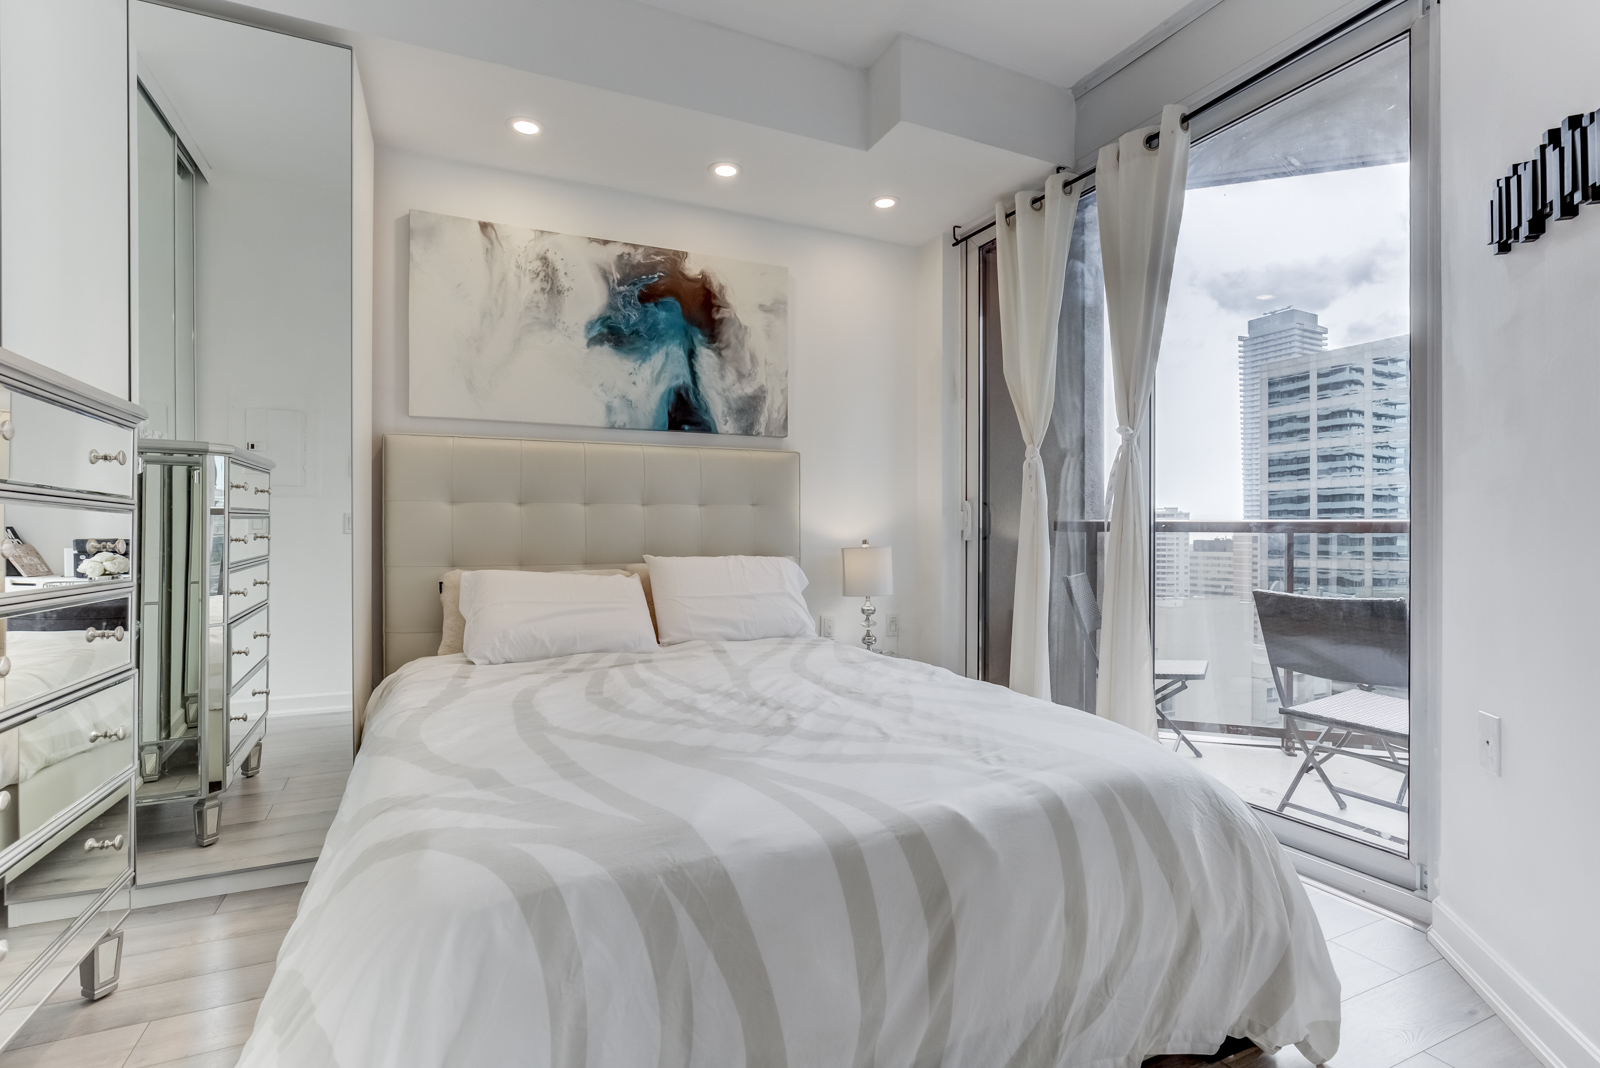 Fully-furnished master bedroom with white queen-sized bed and white laminate floors.